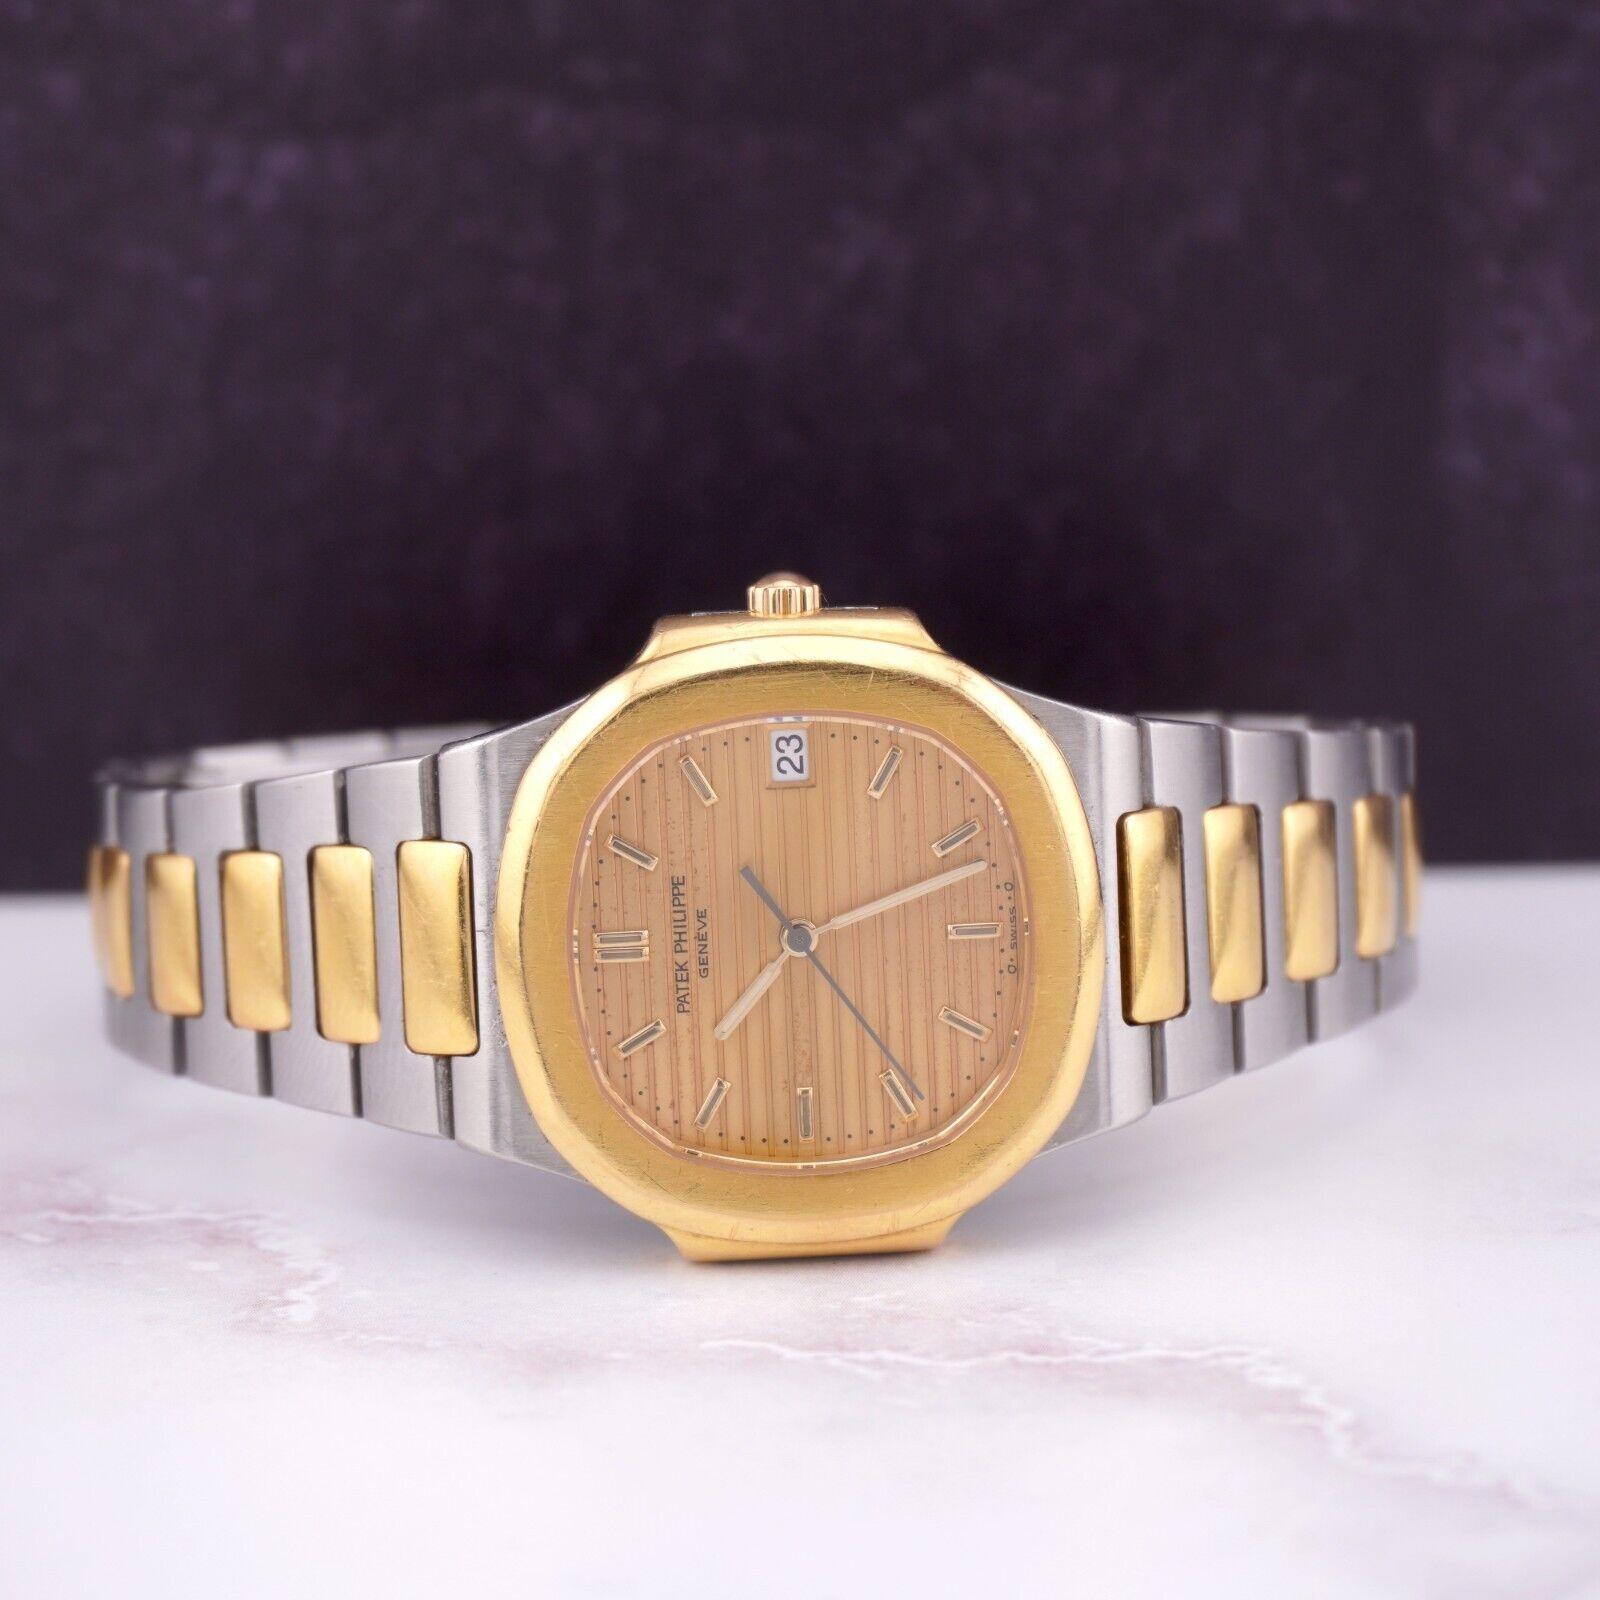 Patek Philippe Nautilus 34mm Watch. A Pre-owned watch w/ Gift Box. Watch is 100% Authentic and Comes with Authenticity Card. Watch Reference is 3900/1JA and is in Great Condition (See Pictures). The dial color is Gold is and material is 18k Yellow